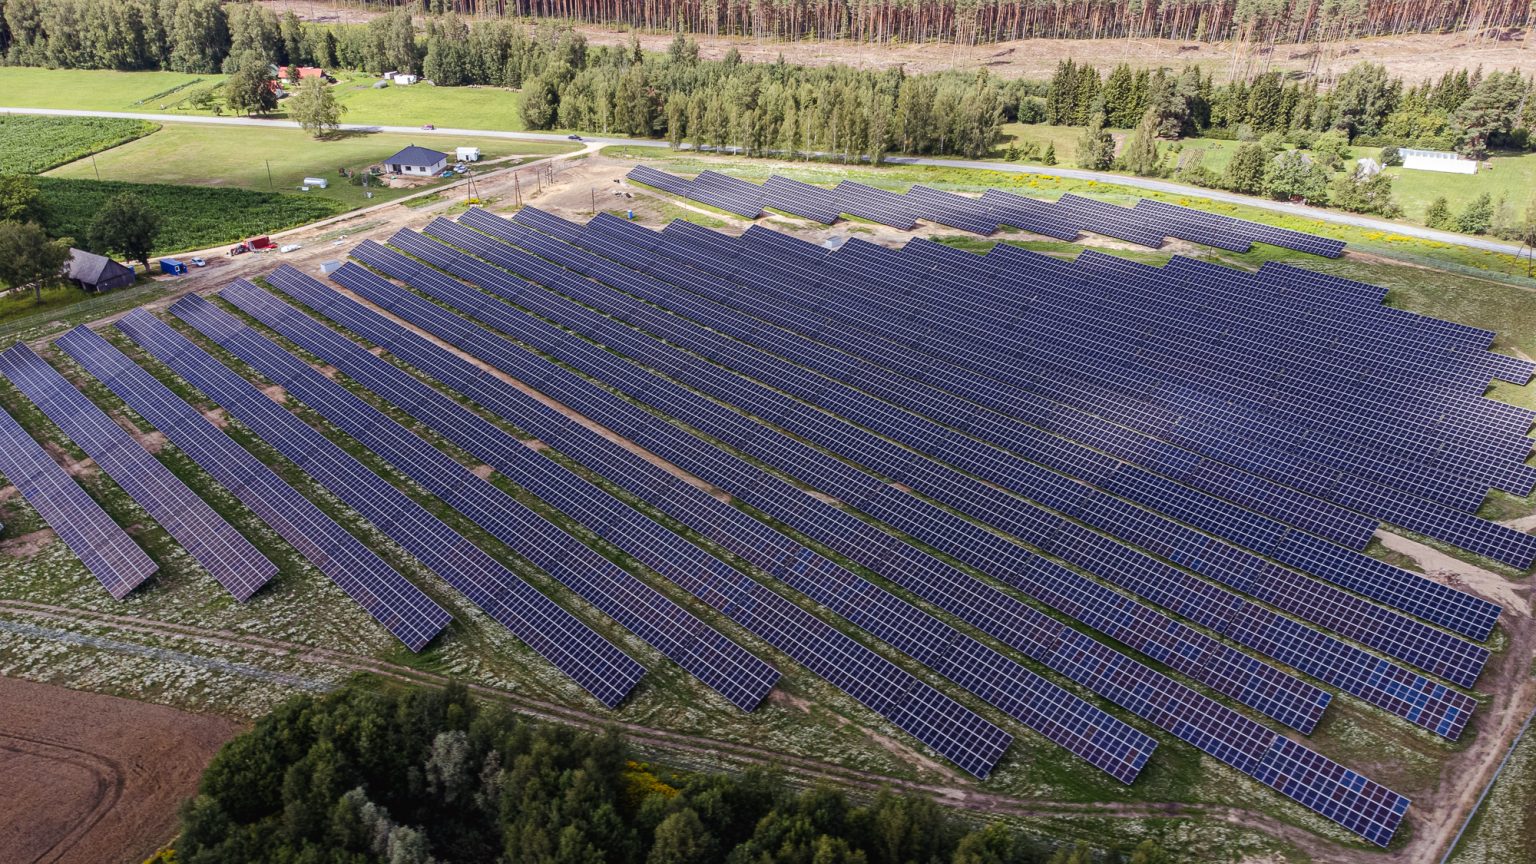 Merito Partners commissions Latvia’s largest solar power plant in Brenguļi